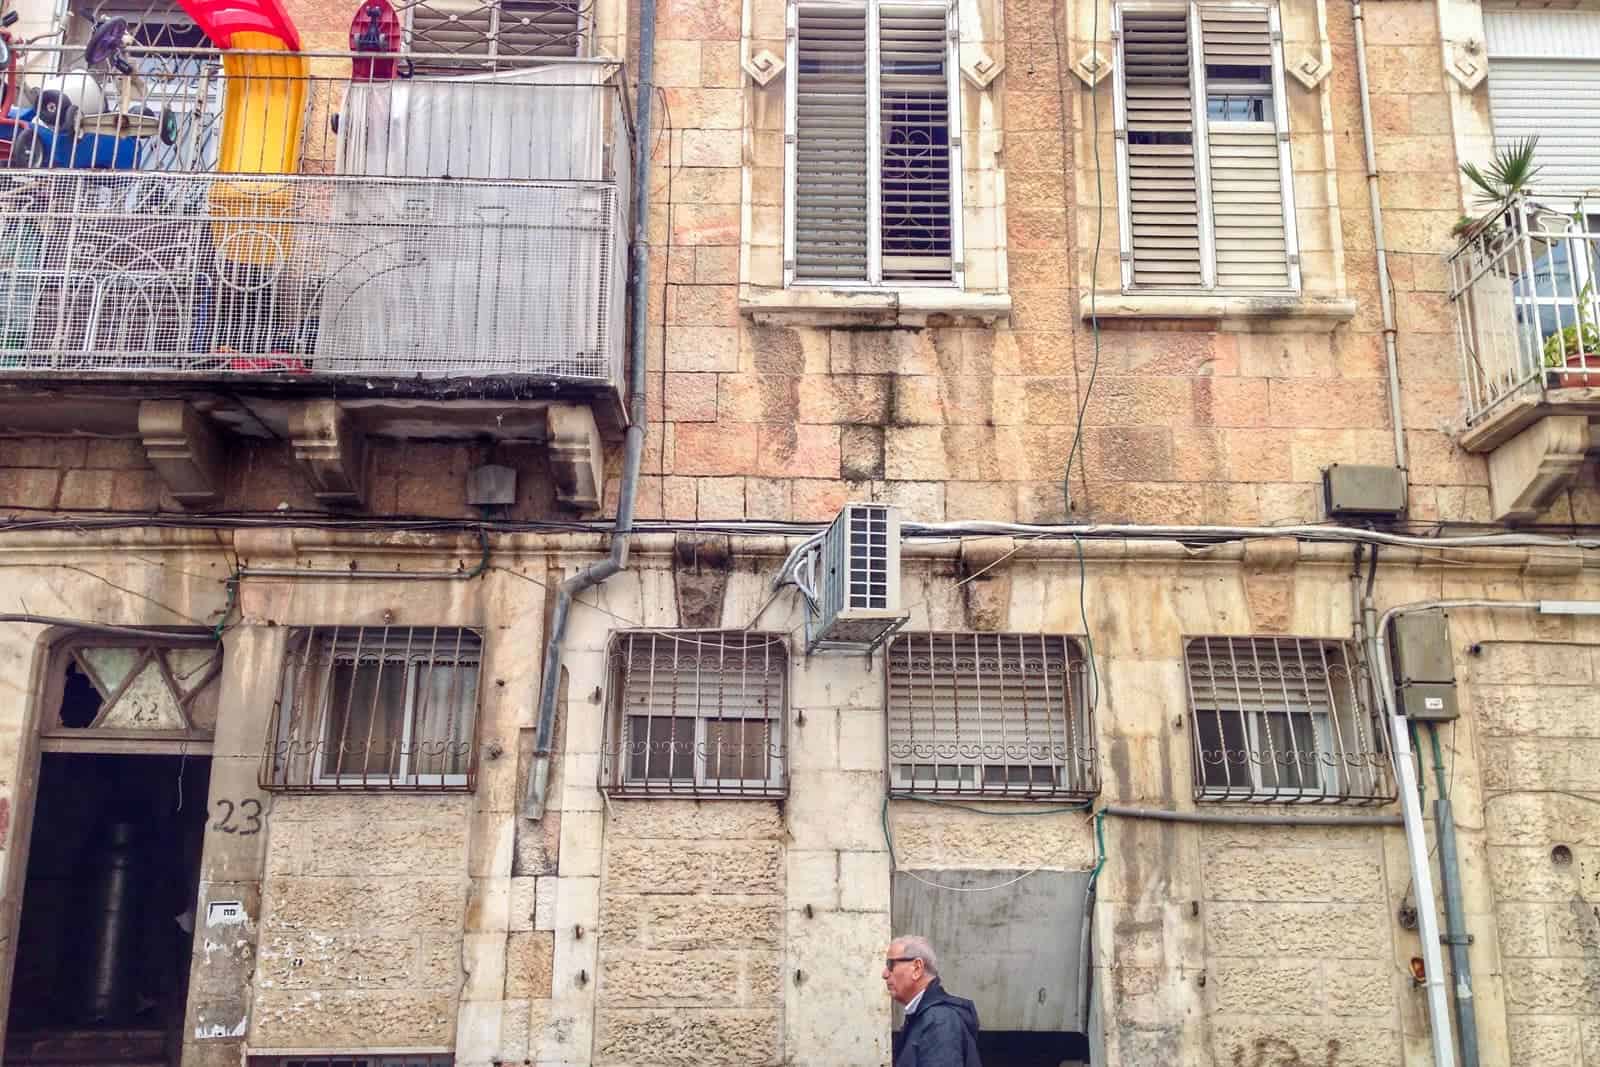 A man walks past a beige brick building in Jerusalem. The windows have metal bars and the first floor has a metal balcony.